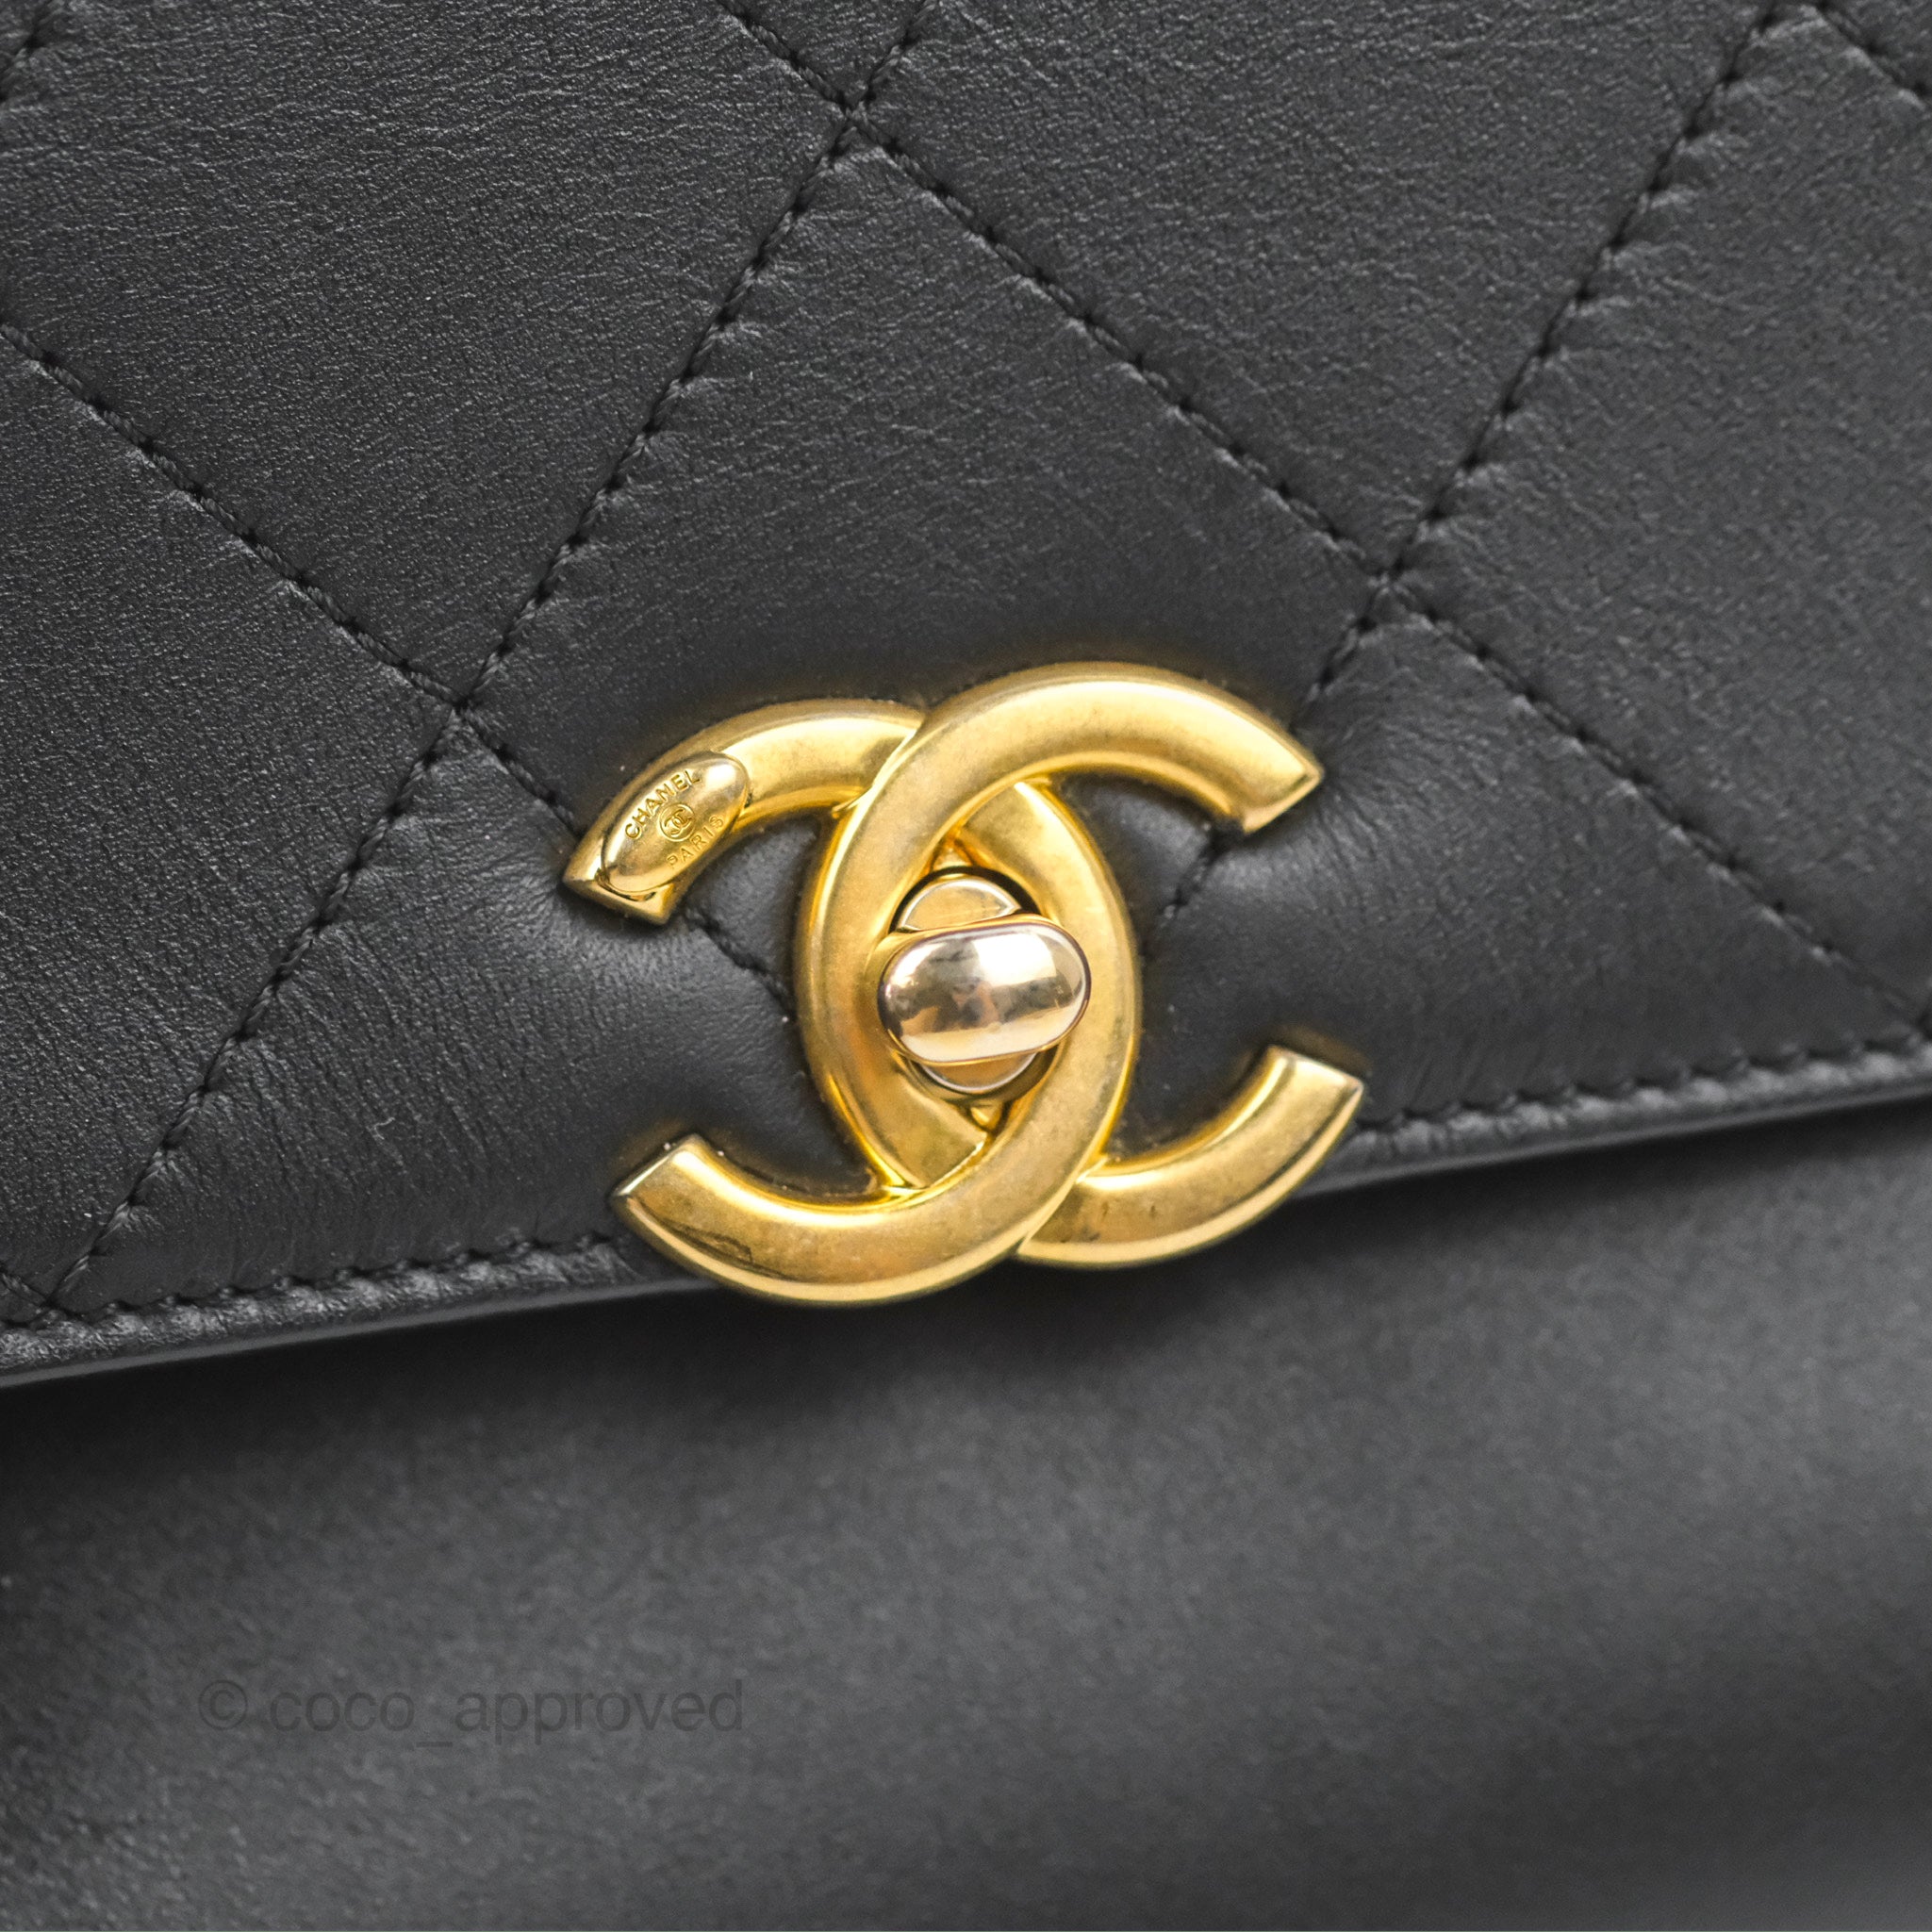 CHANEL CLASSIC VINTAGE BLACK QUILTED LAMBSKIN 24K GOLD CHAIN CC CHARM TOTE  BAG | eBay